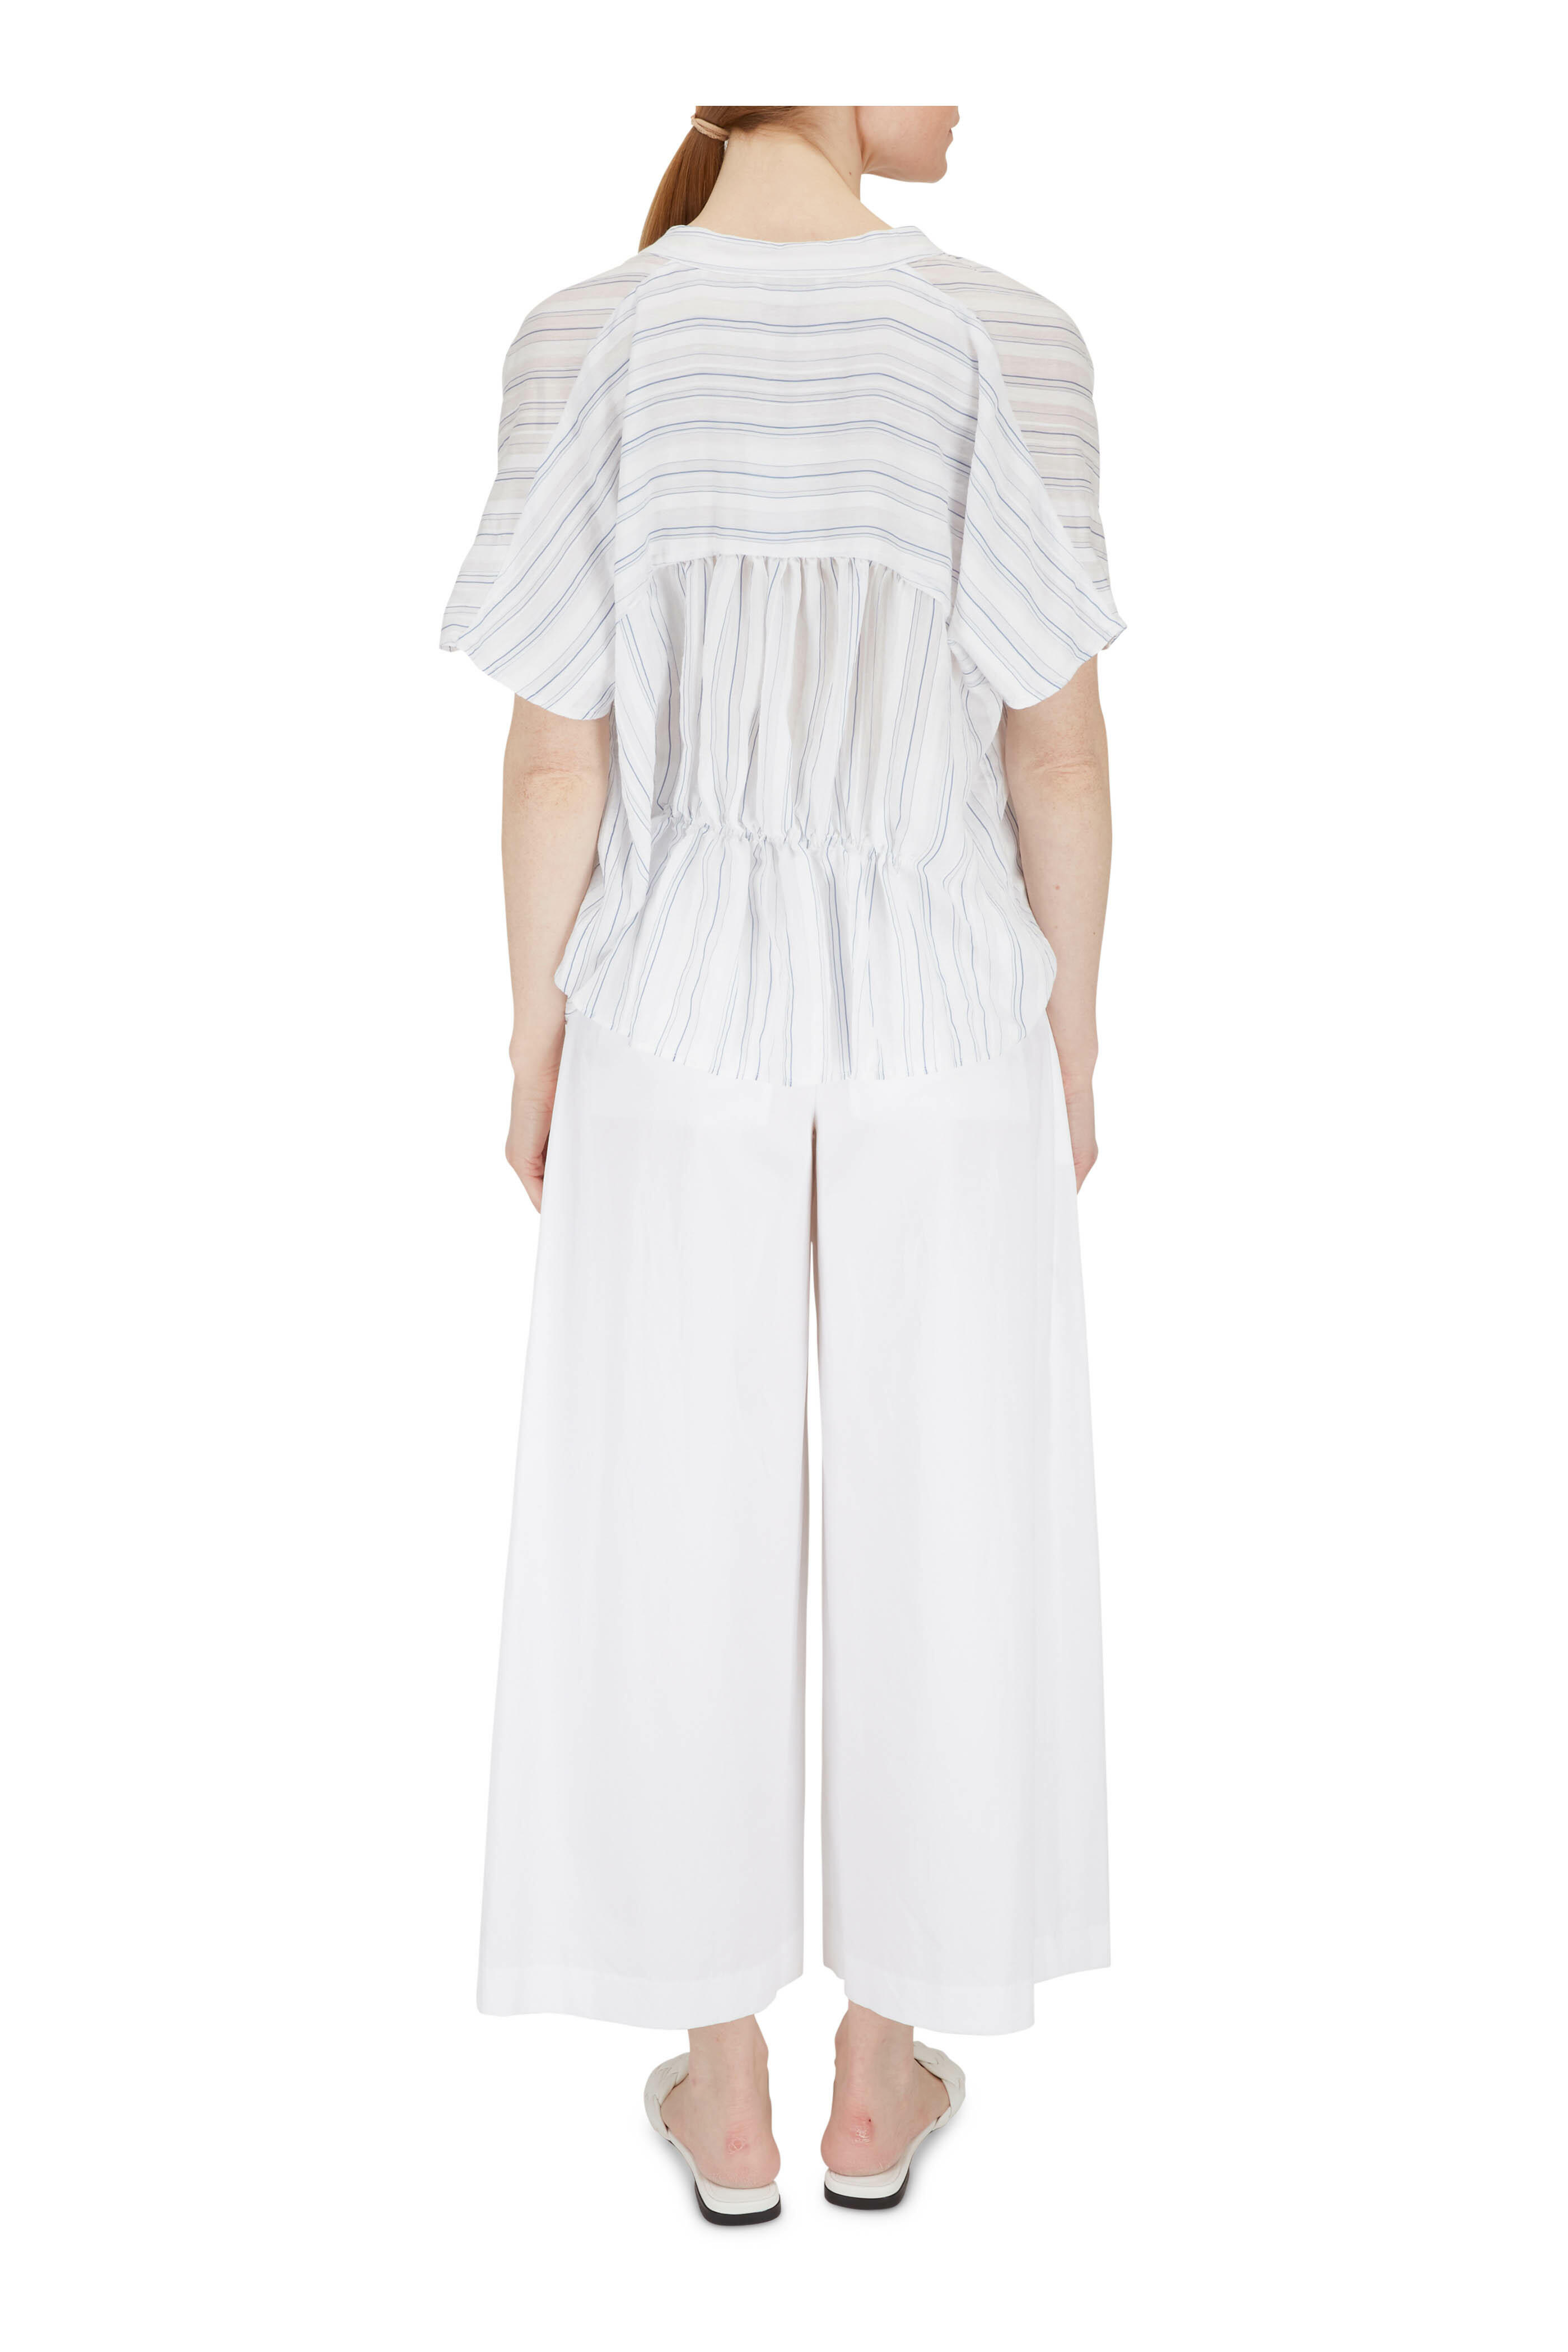 Vince - Optic White Pleated Culotte